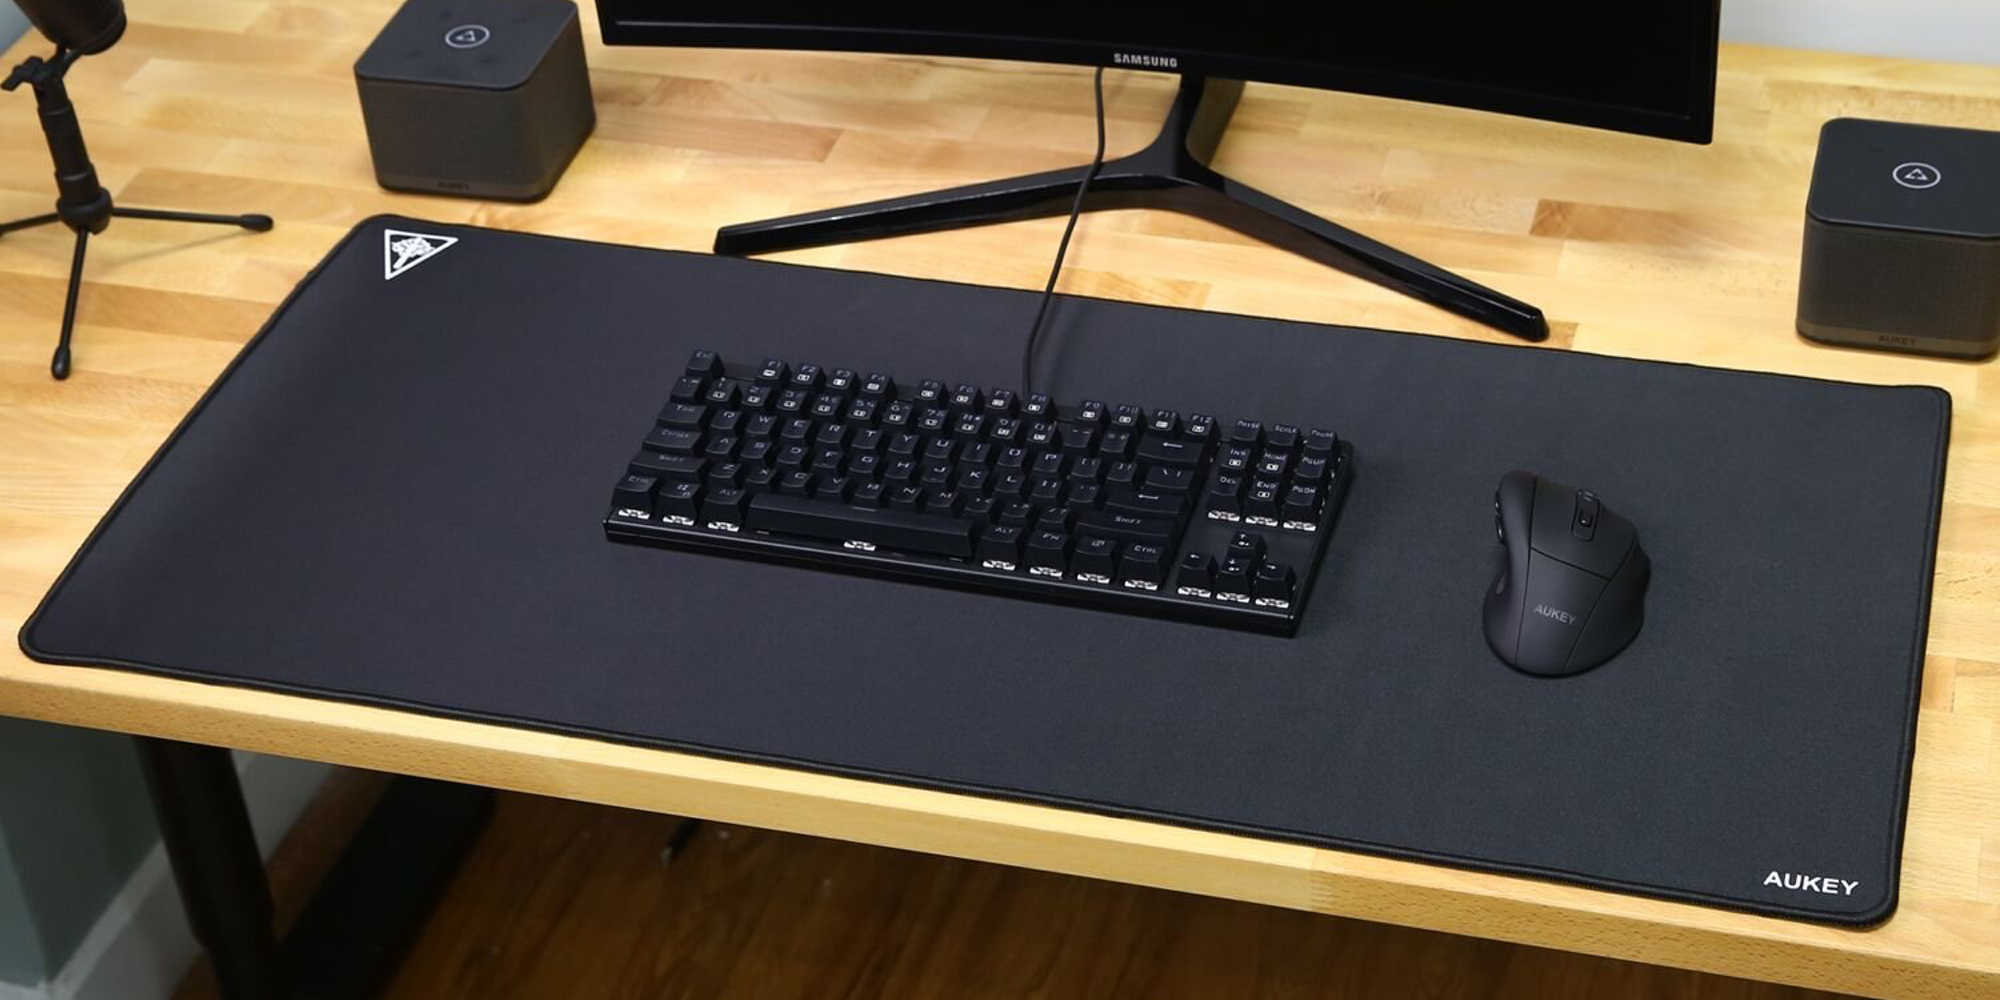 Aukey's XXL gaming mousepad gets a 40% price cut to $12 Prime shipped